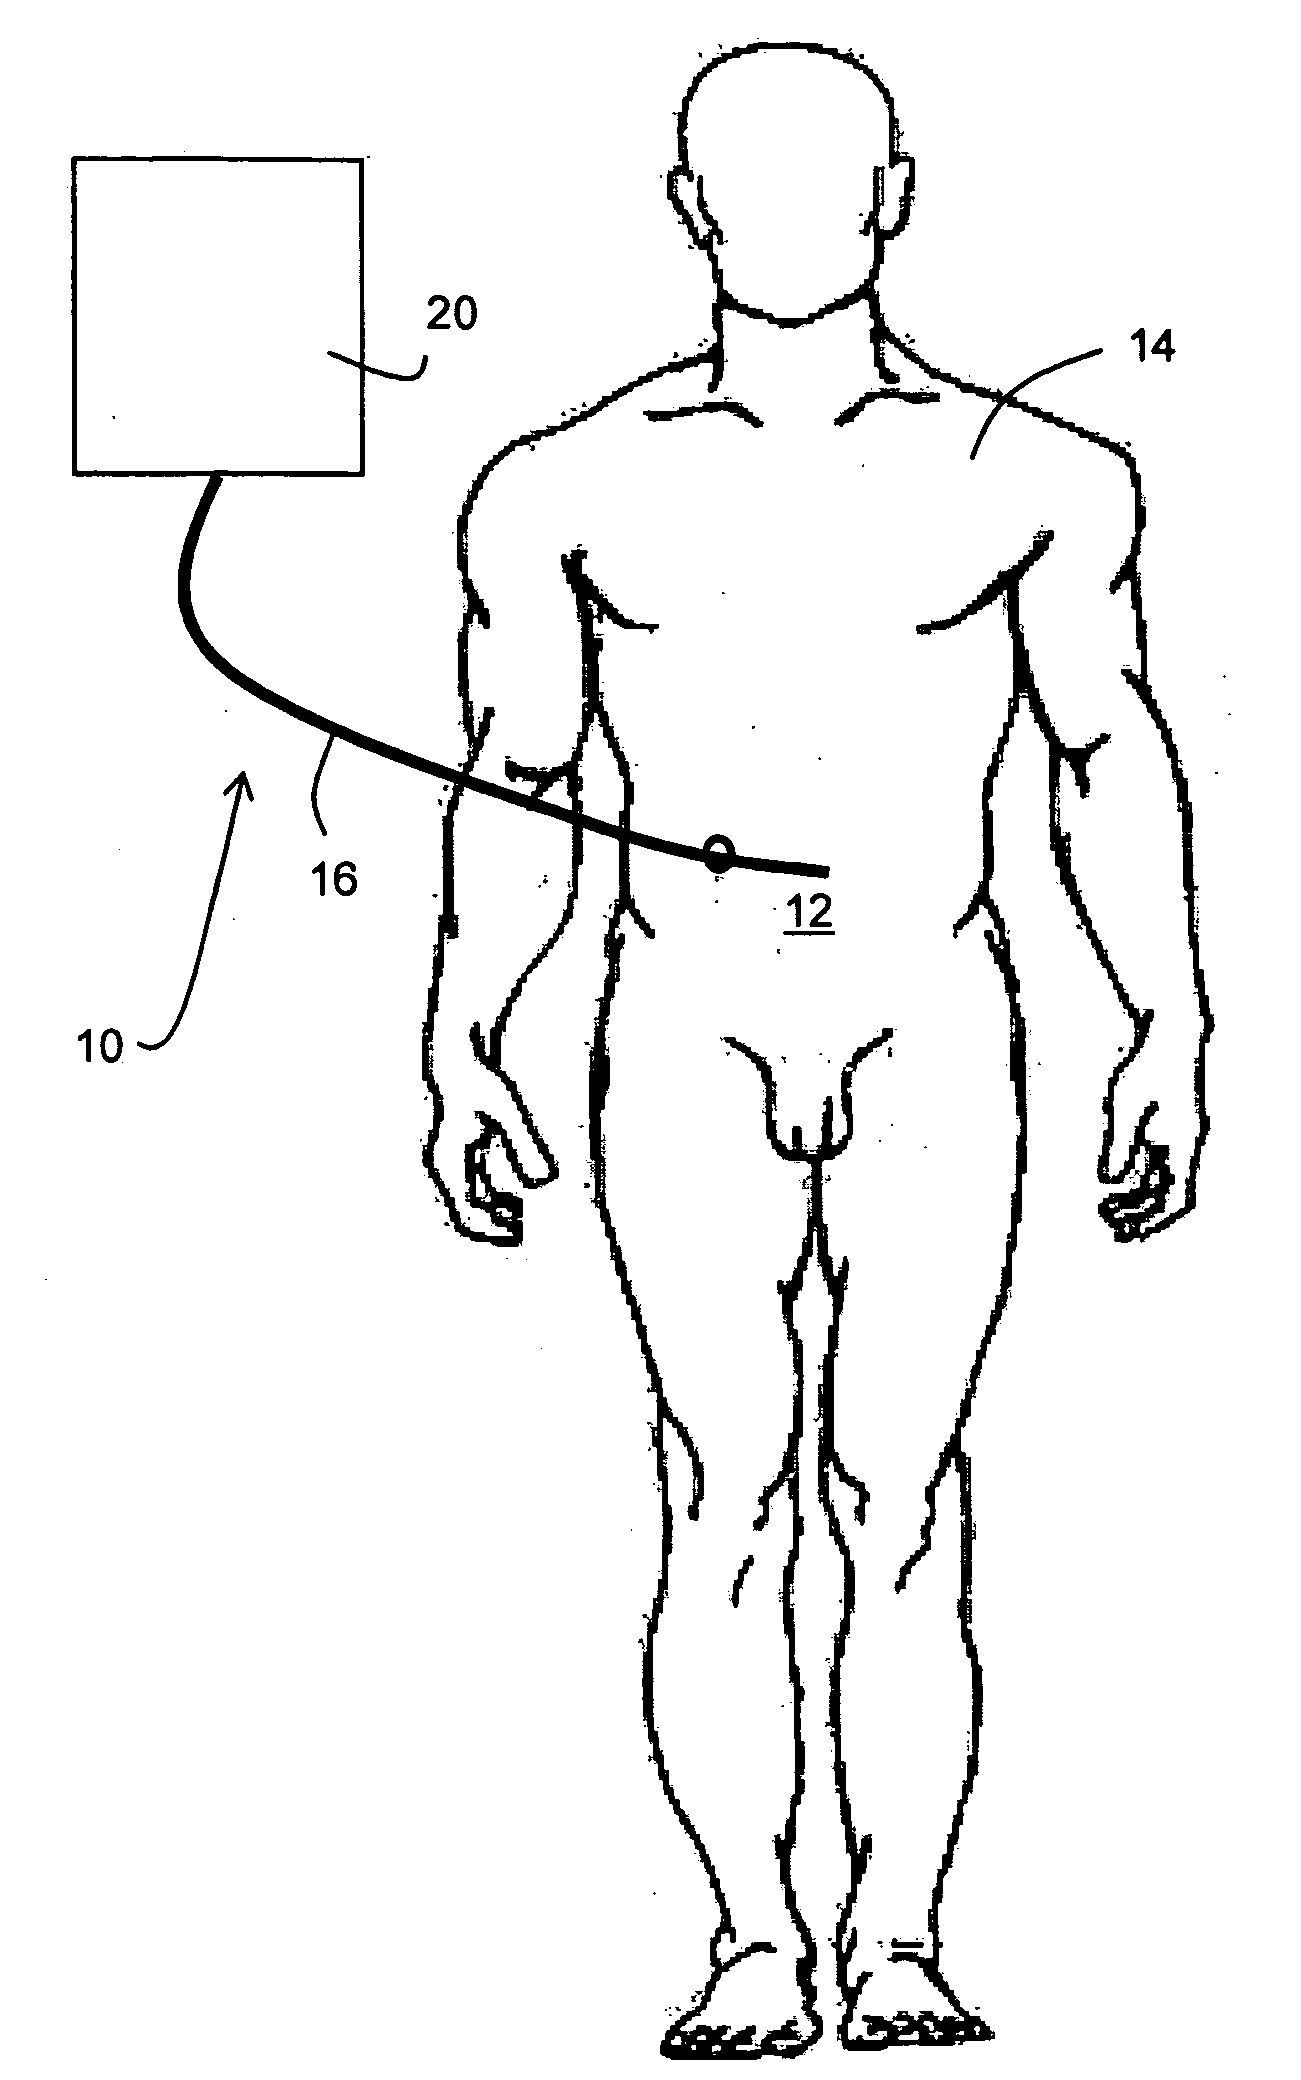 Hypothermia Devices and Methods